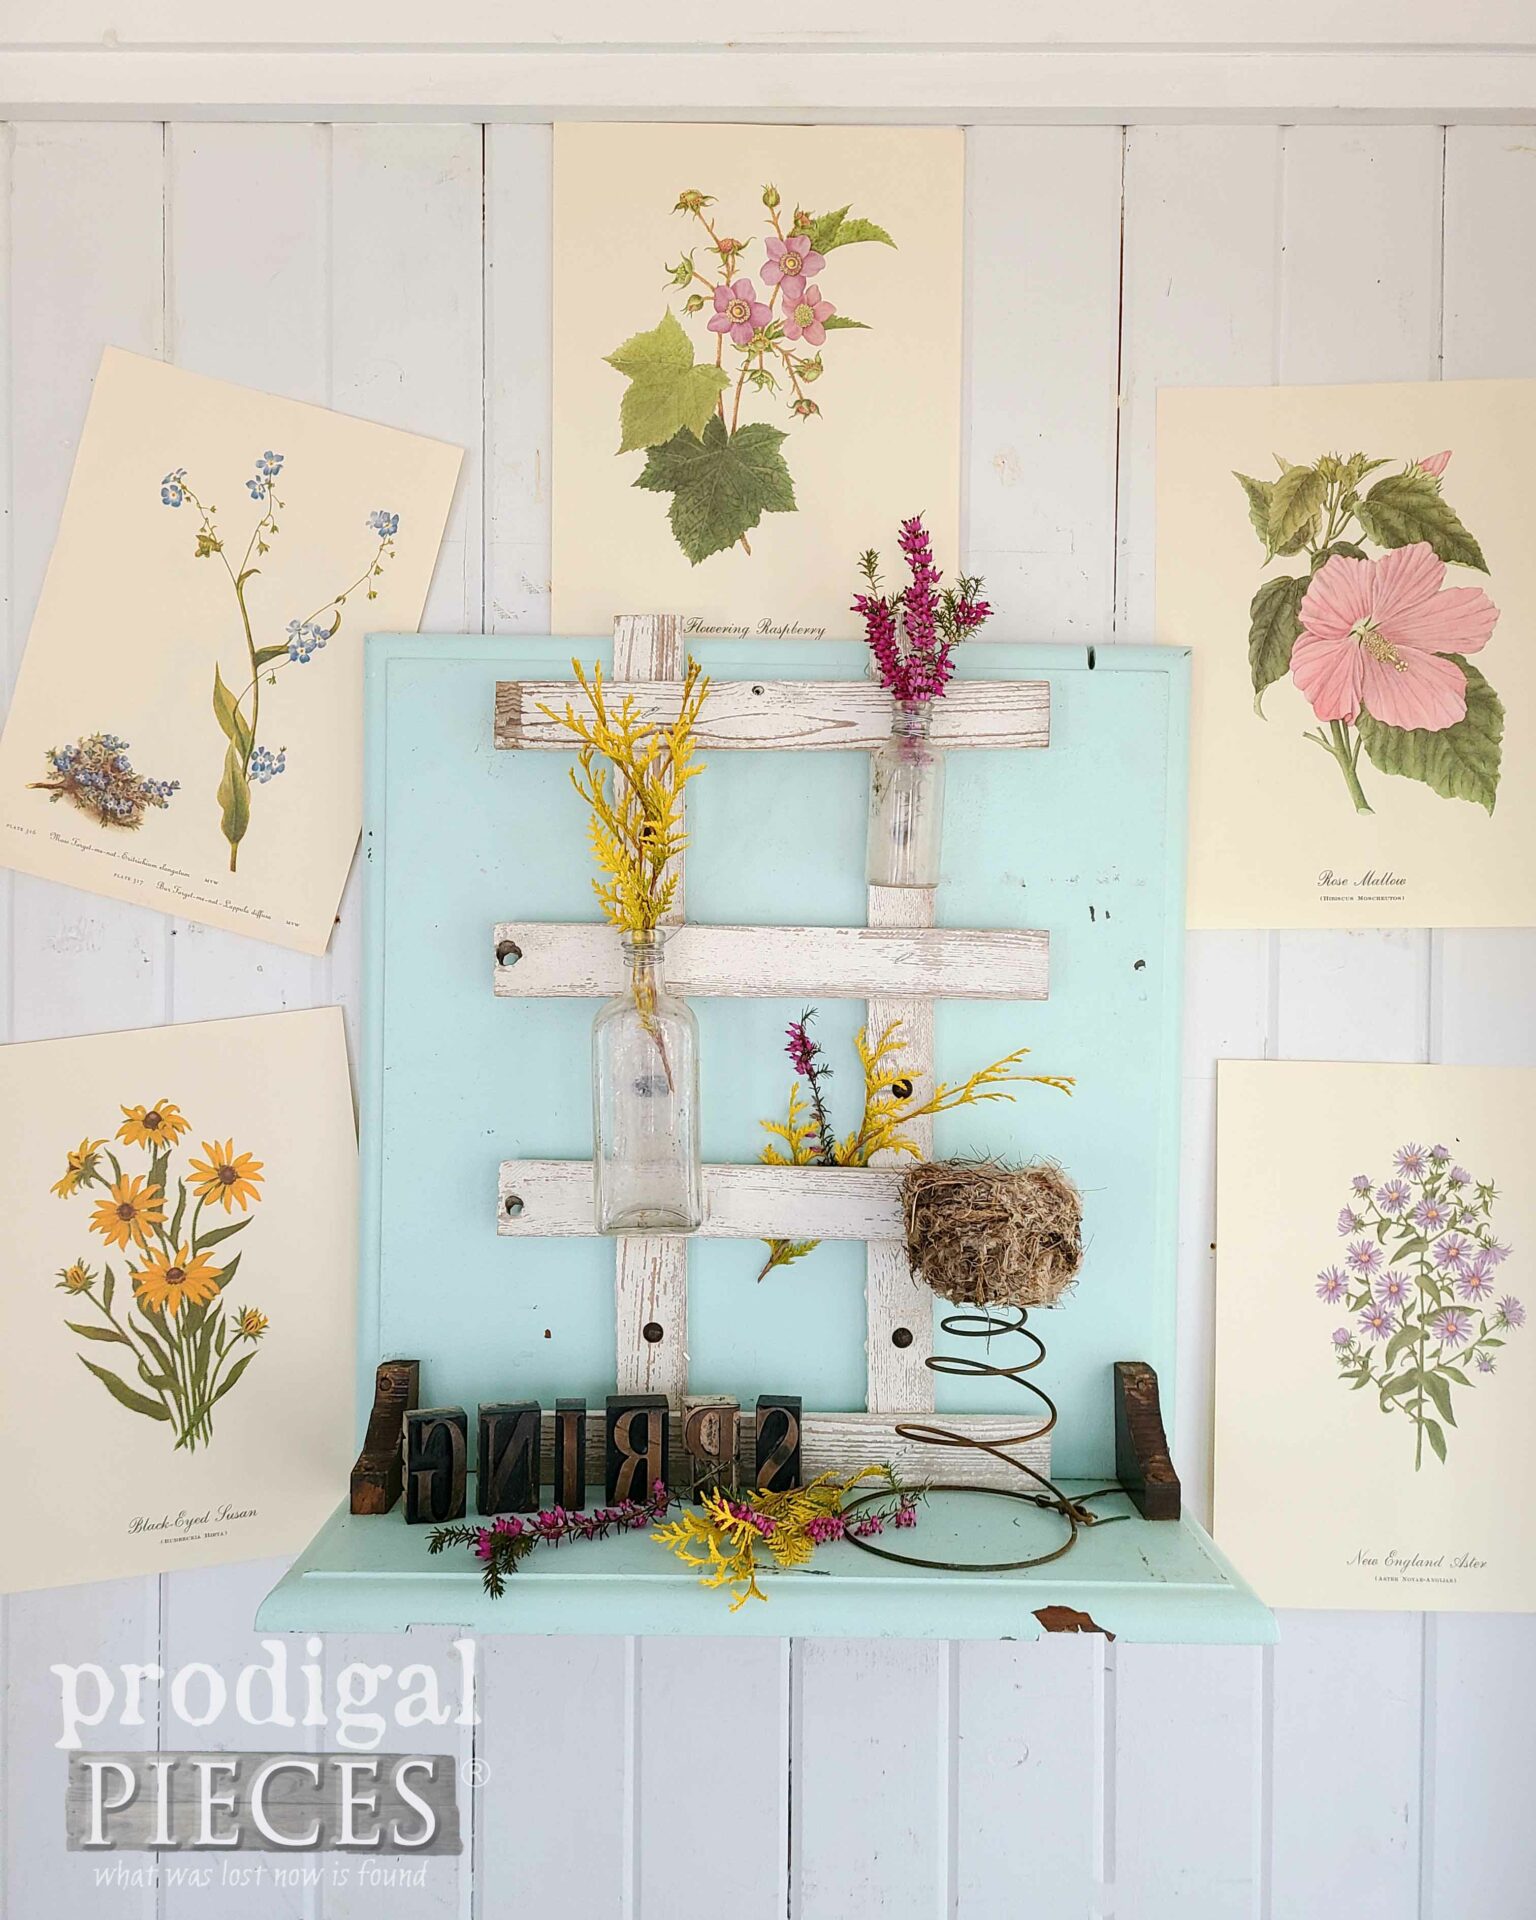 Repurposed Spring Wall Decor made from Sewing Machine Table Top by Larissa of Prodigal Pieces | prodigalpieces.com #prodigalpieces #sewing #diy #repurposed